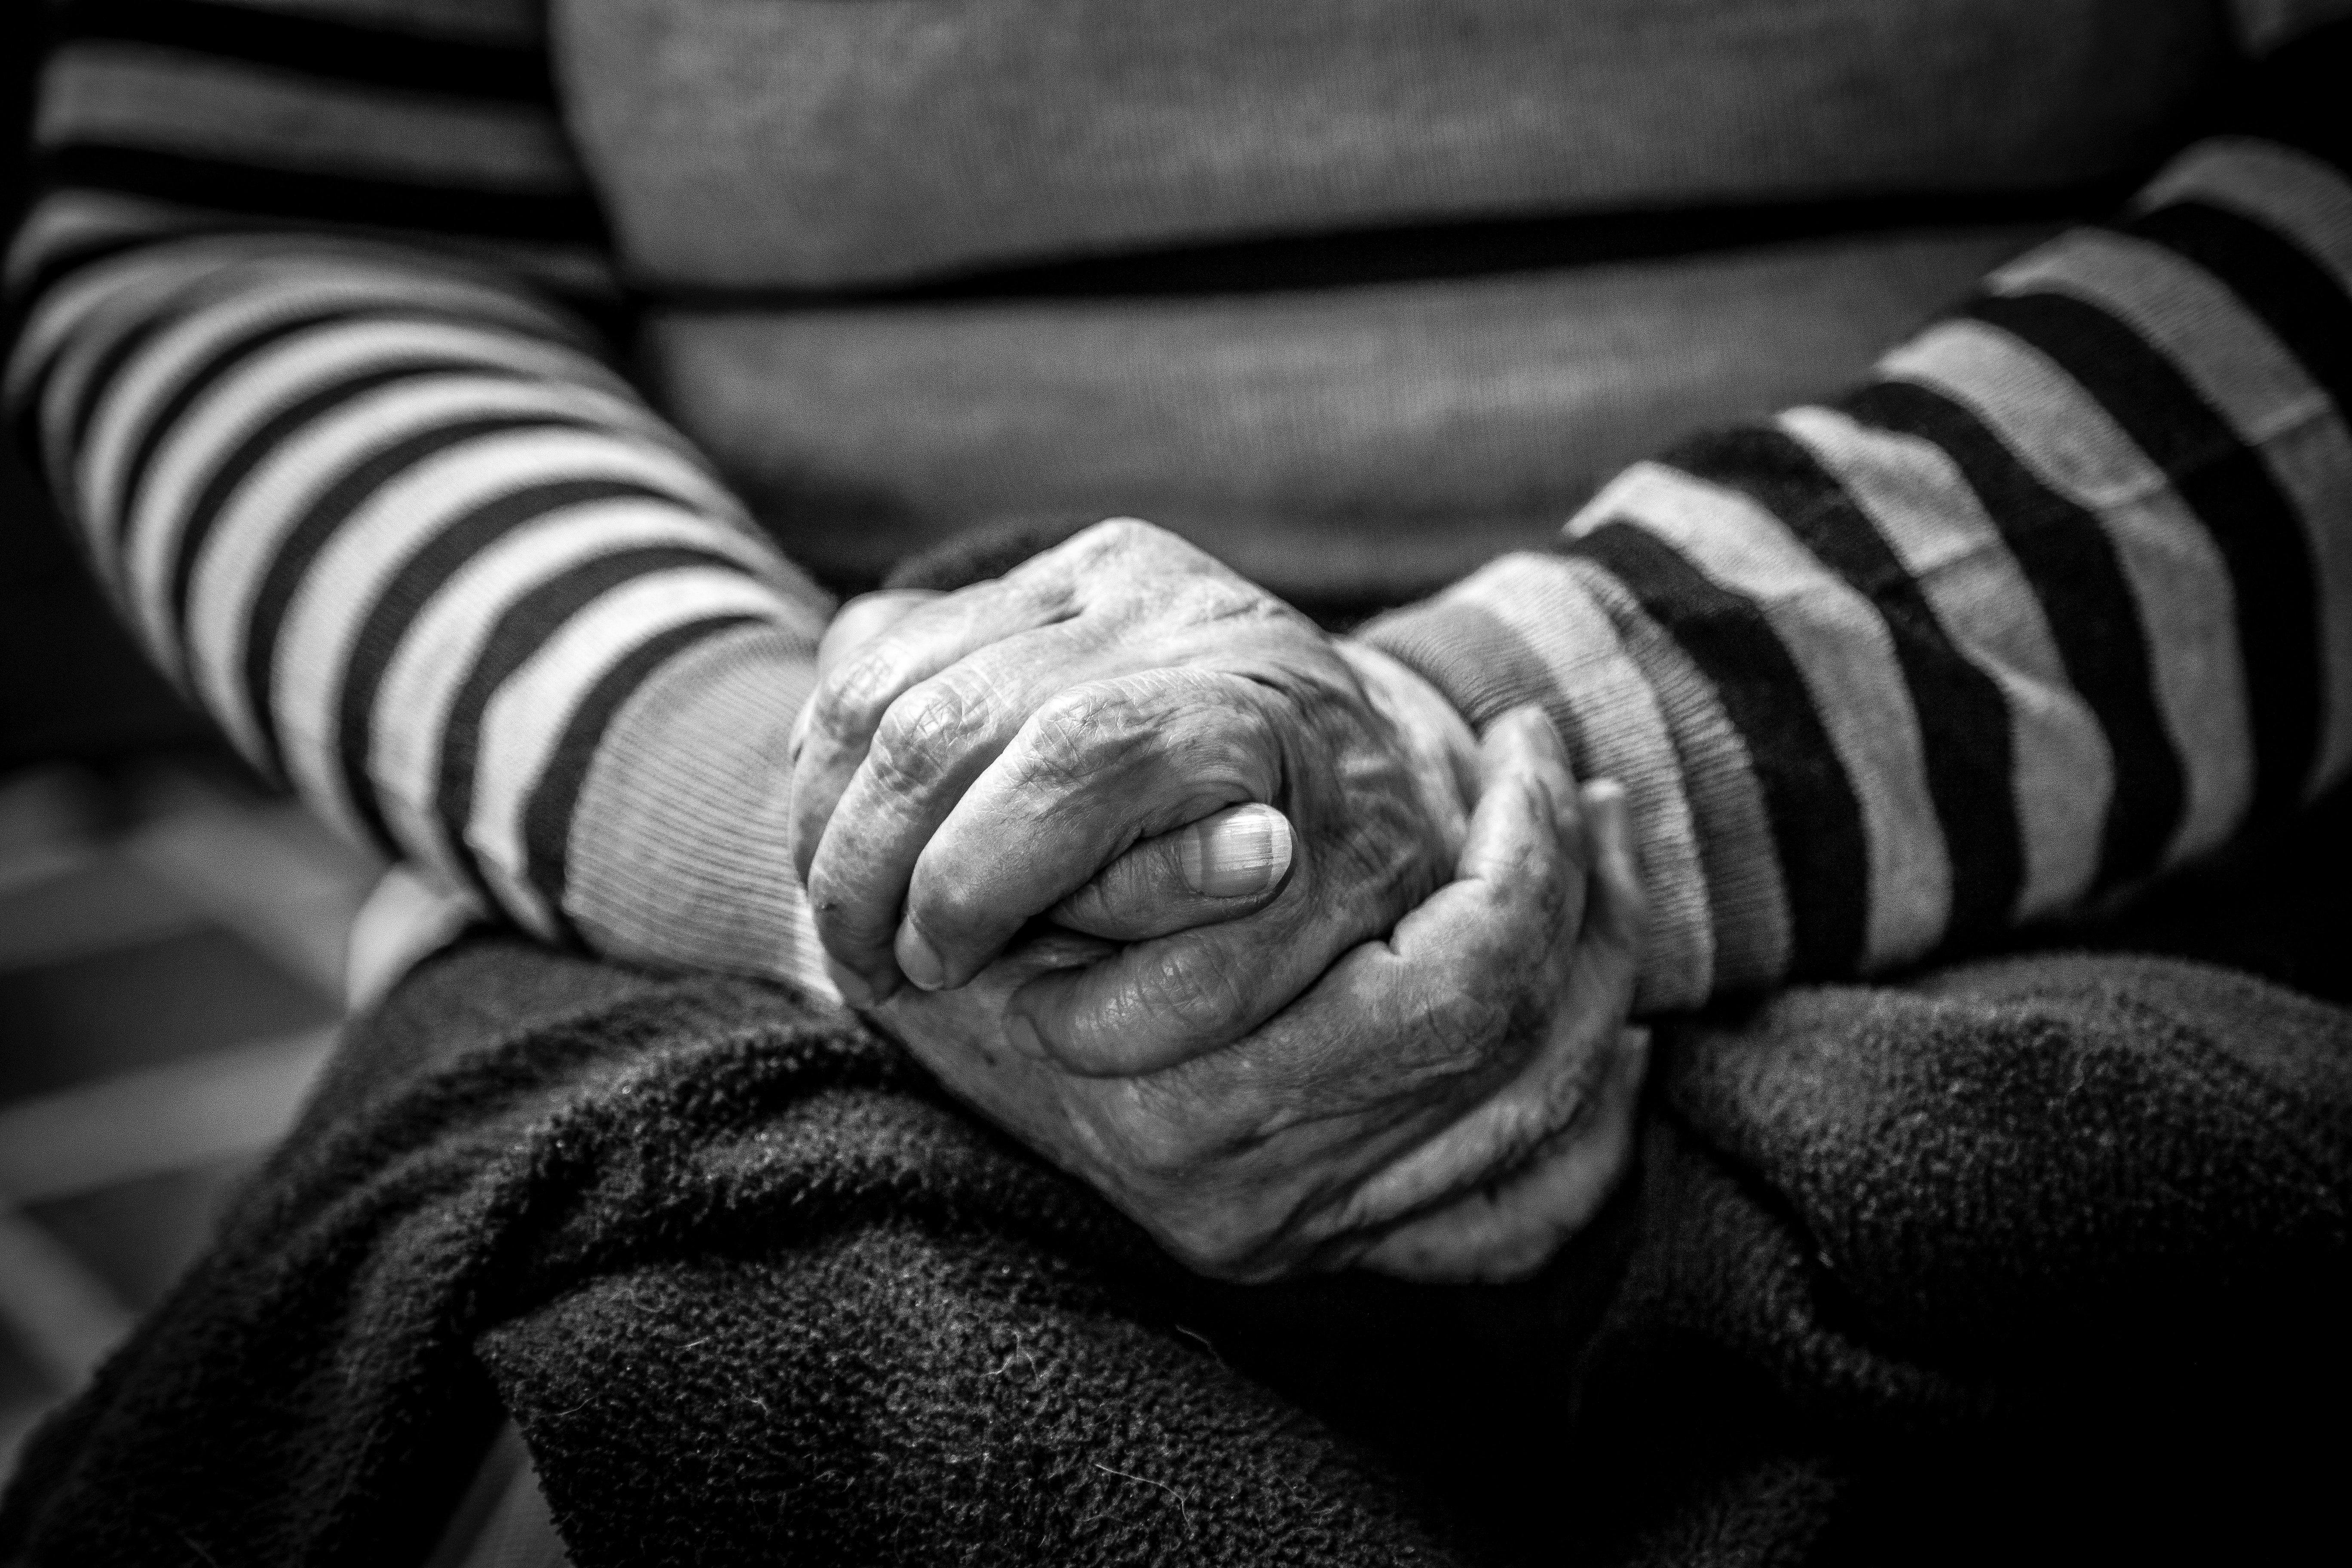 ‘We have the same rights’ – a project by ENNHRI on the human rights of older persons in long-term care